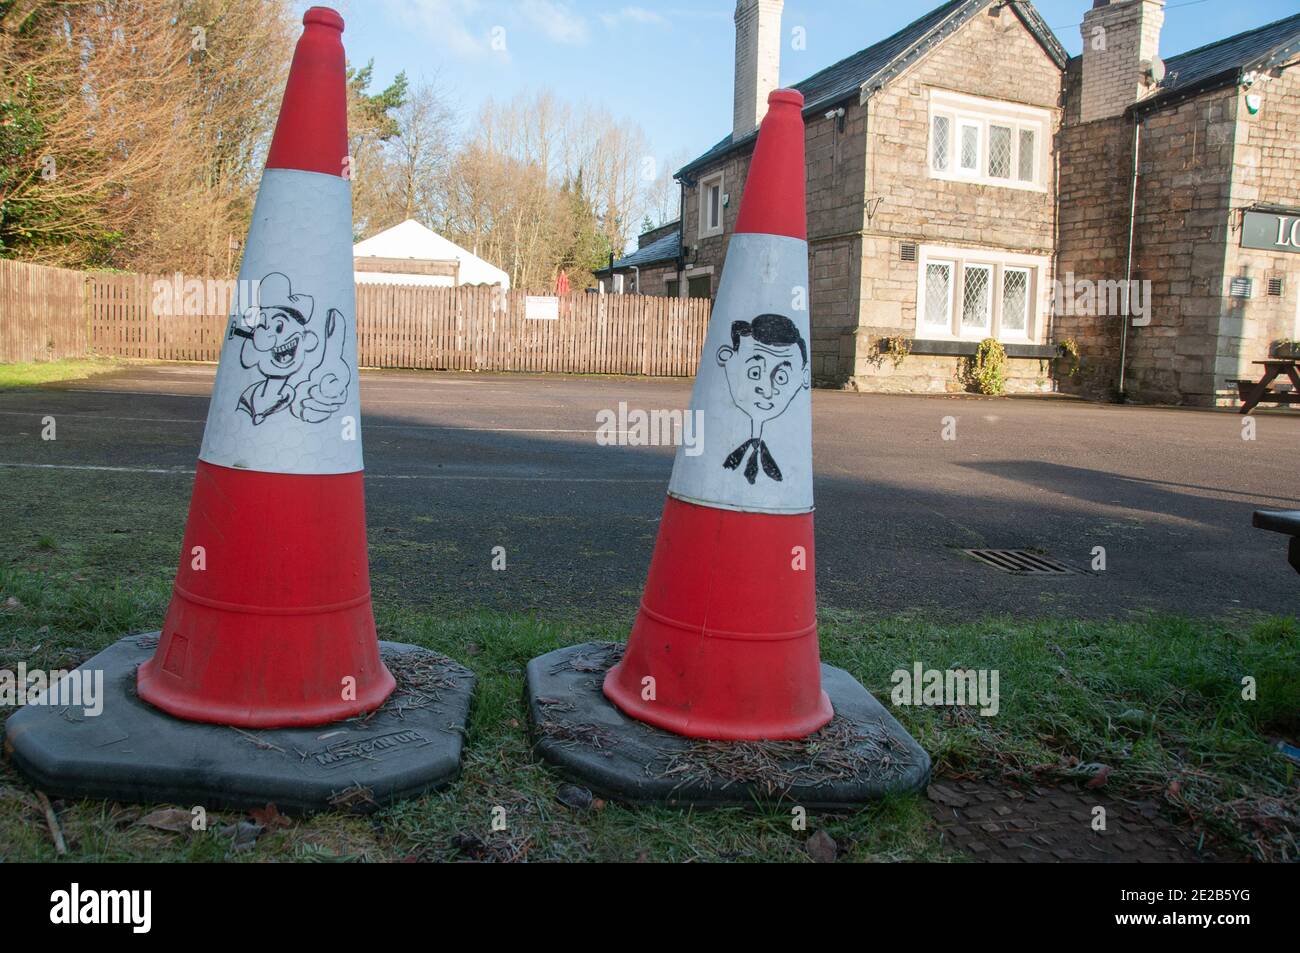 Traffic Cones with added character Stock Photo